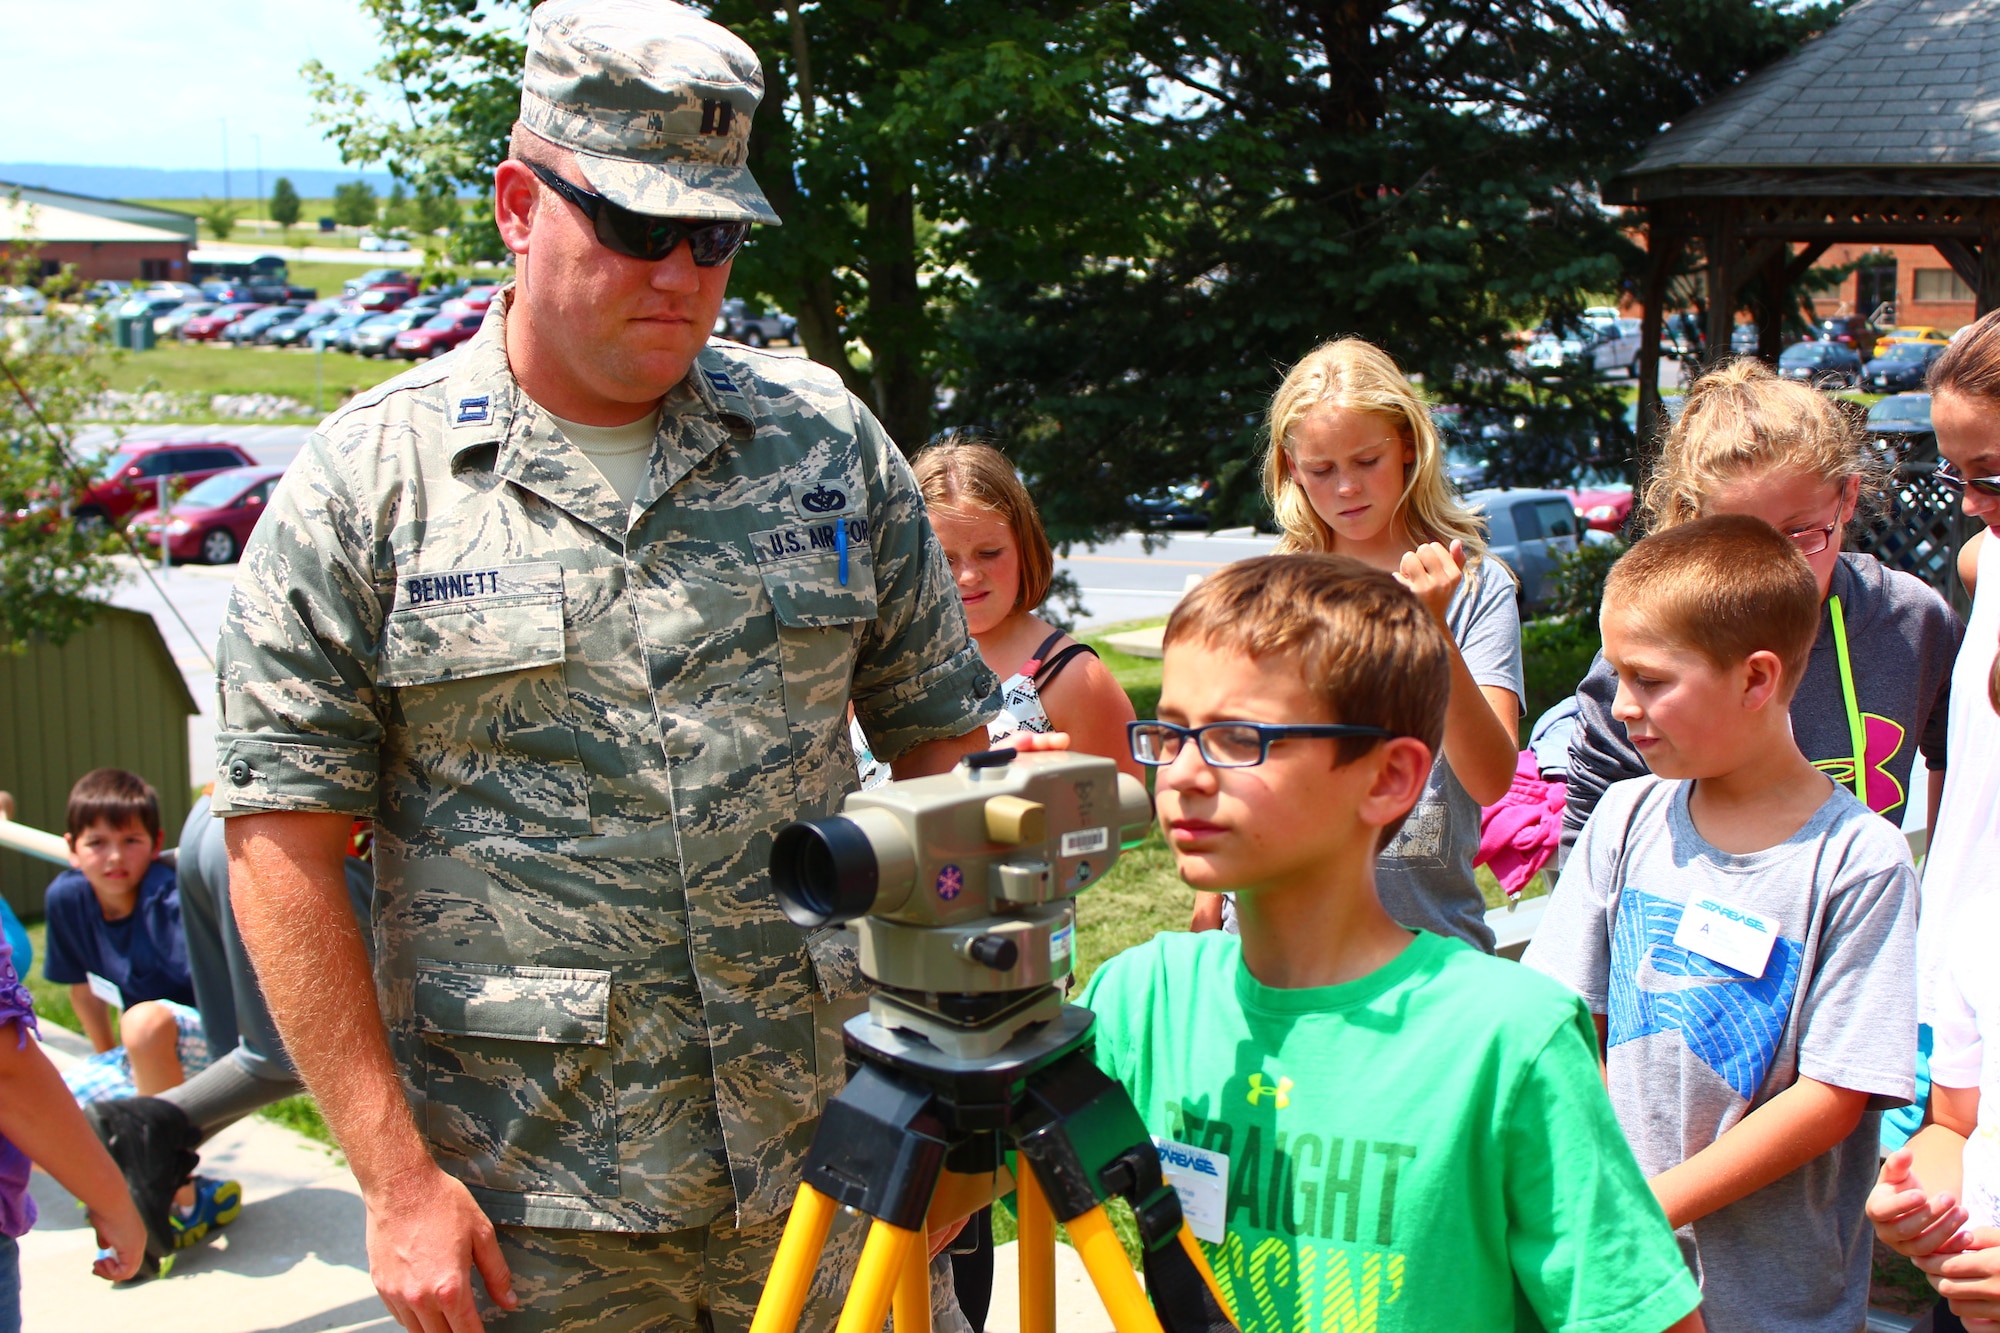 Capt. Blake Bennett, the 167th environmental manager, shows STARBASE Kids campers how to check ground elevation and slope using a level gun, Wednesday, July 30 at the 167th Airlift Wing in Martinsburg, W.Va. (Air National Guard photo by Senior Airman Nathanial Taylor.)